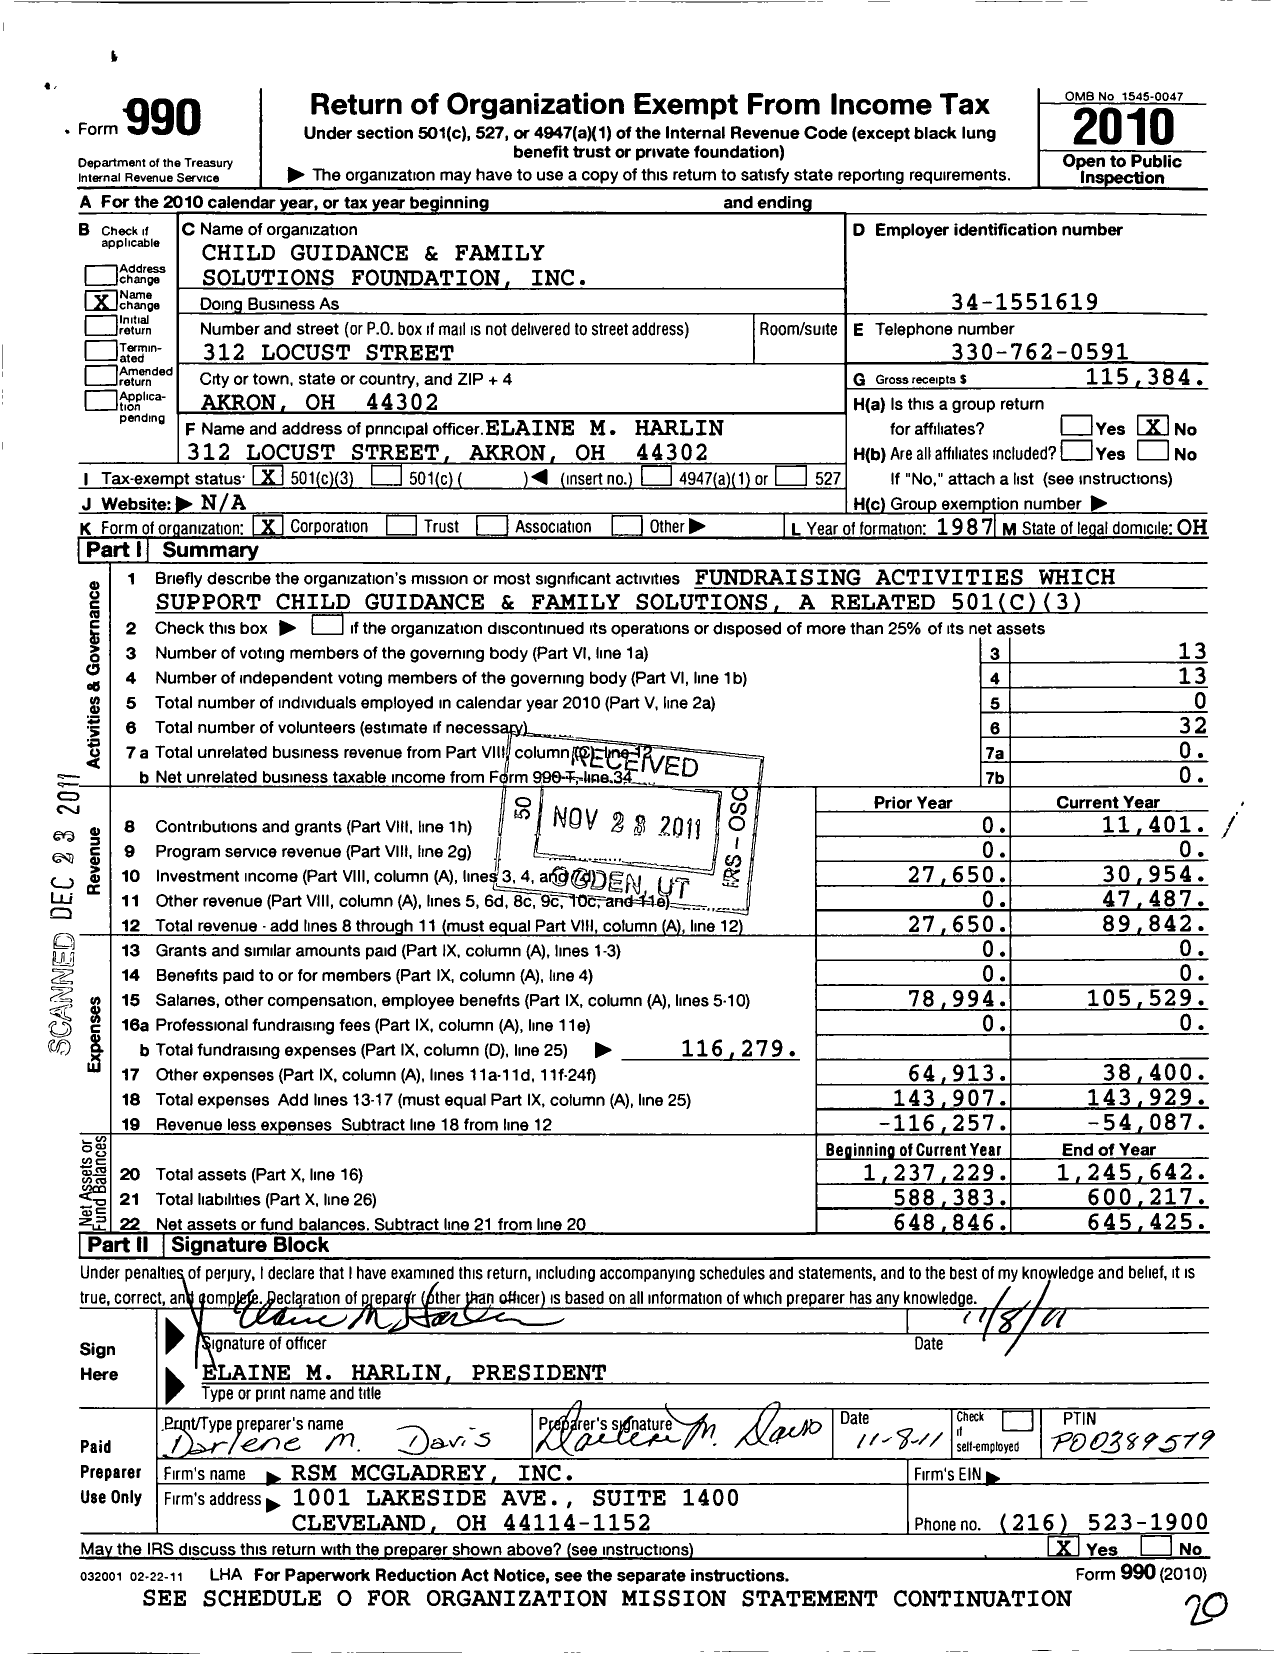 Image of first page of 2010 Form 990 for Child Guidance and Family Solutions Foundation